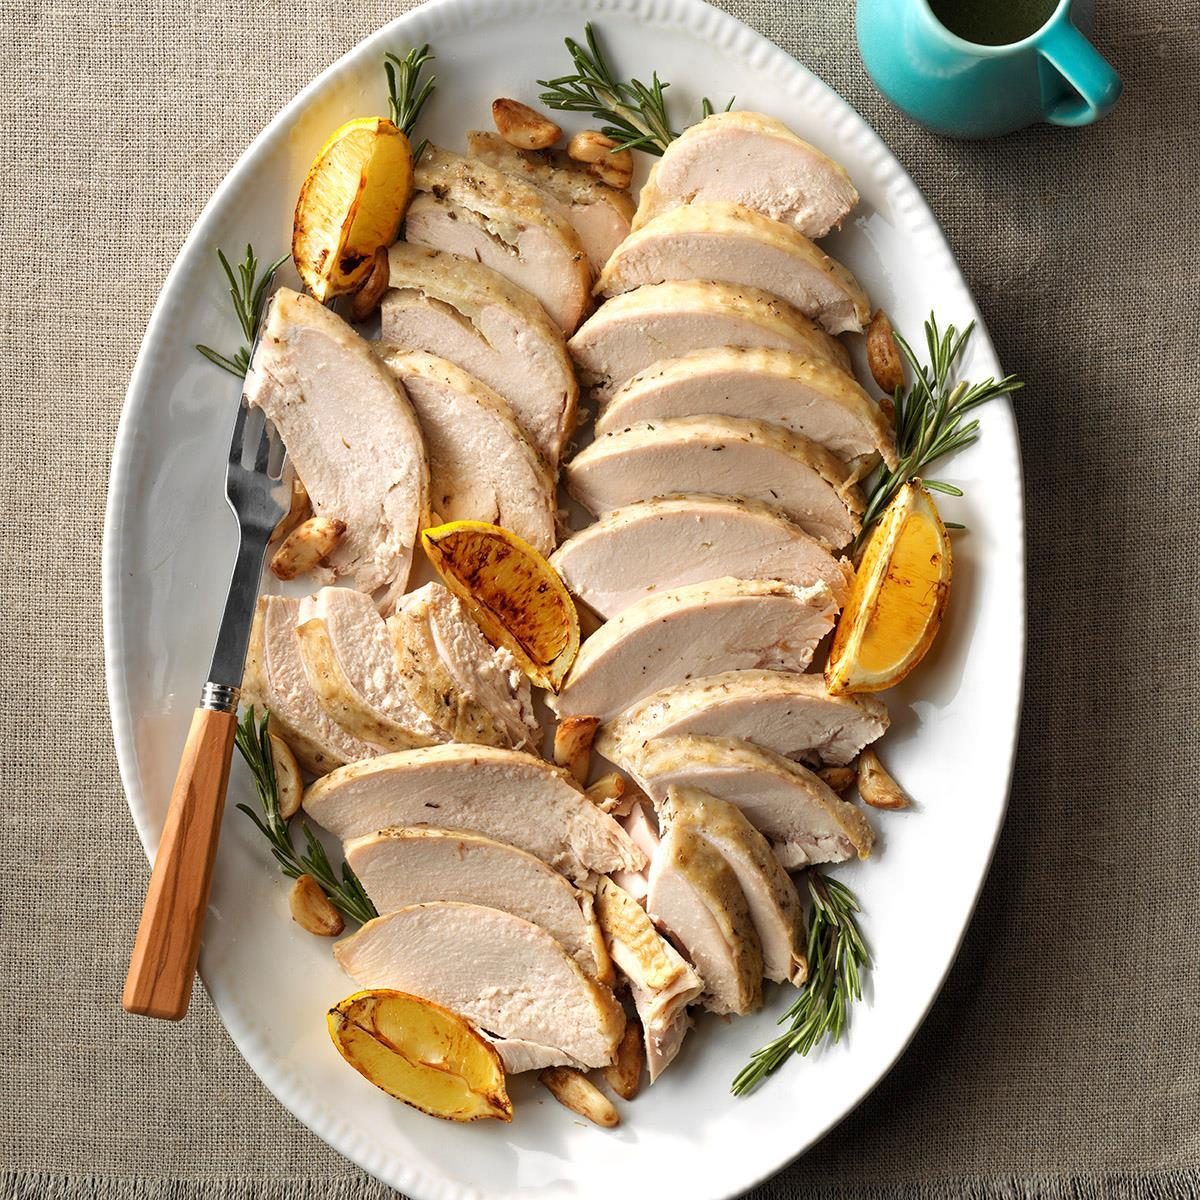 Butter & Herb Turkey Recipe: How to Make It